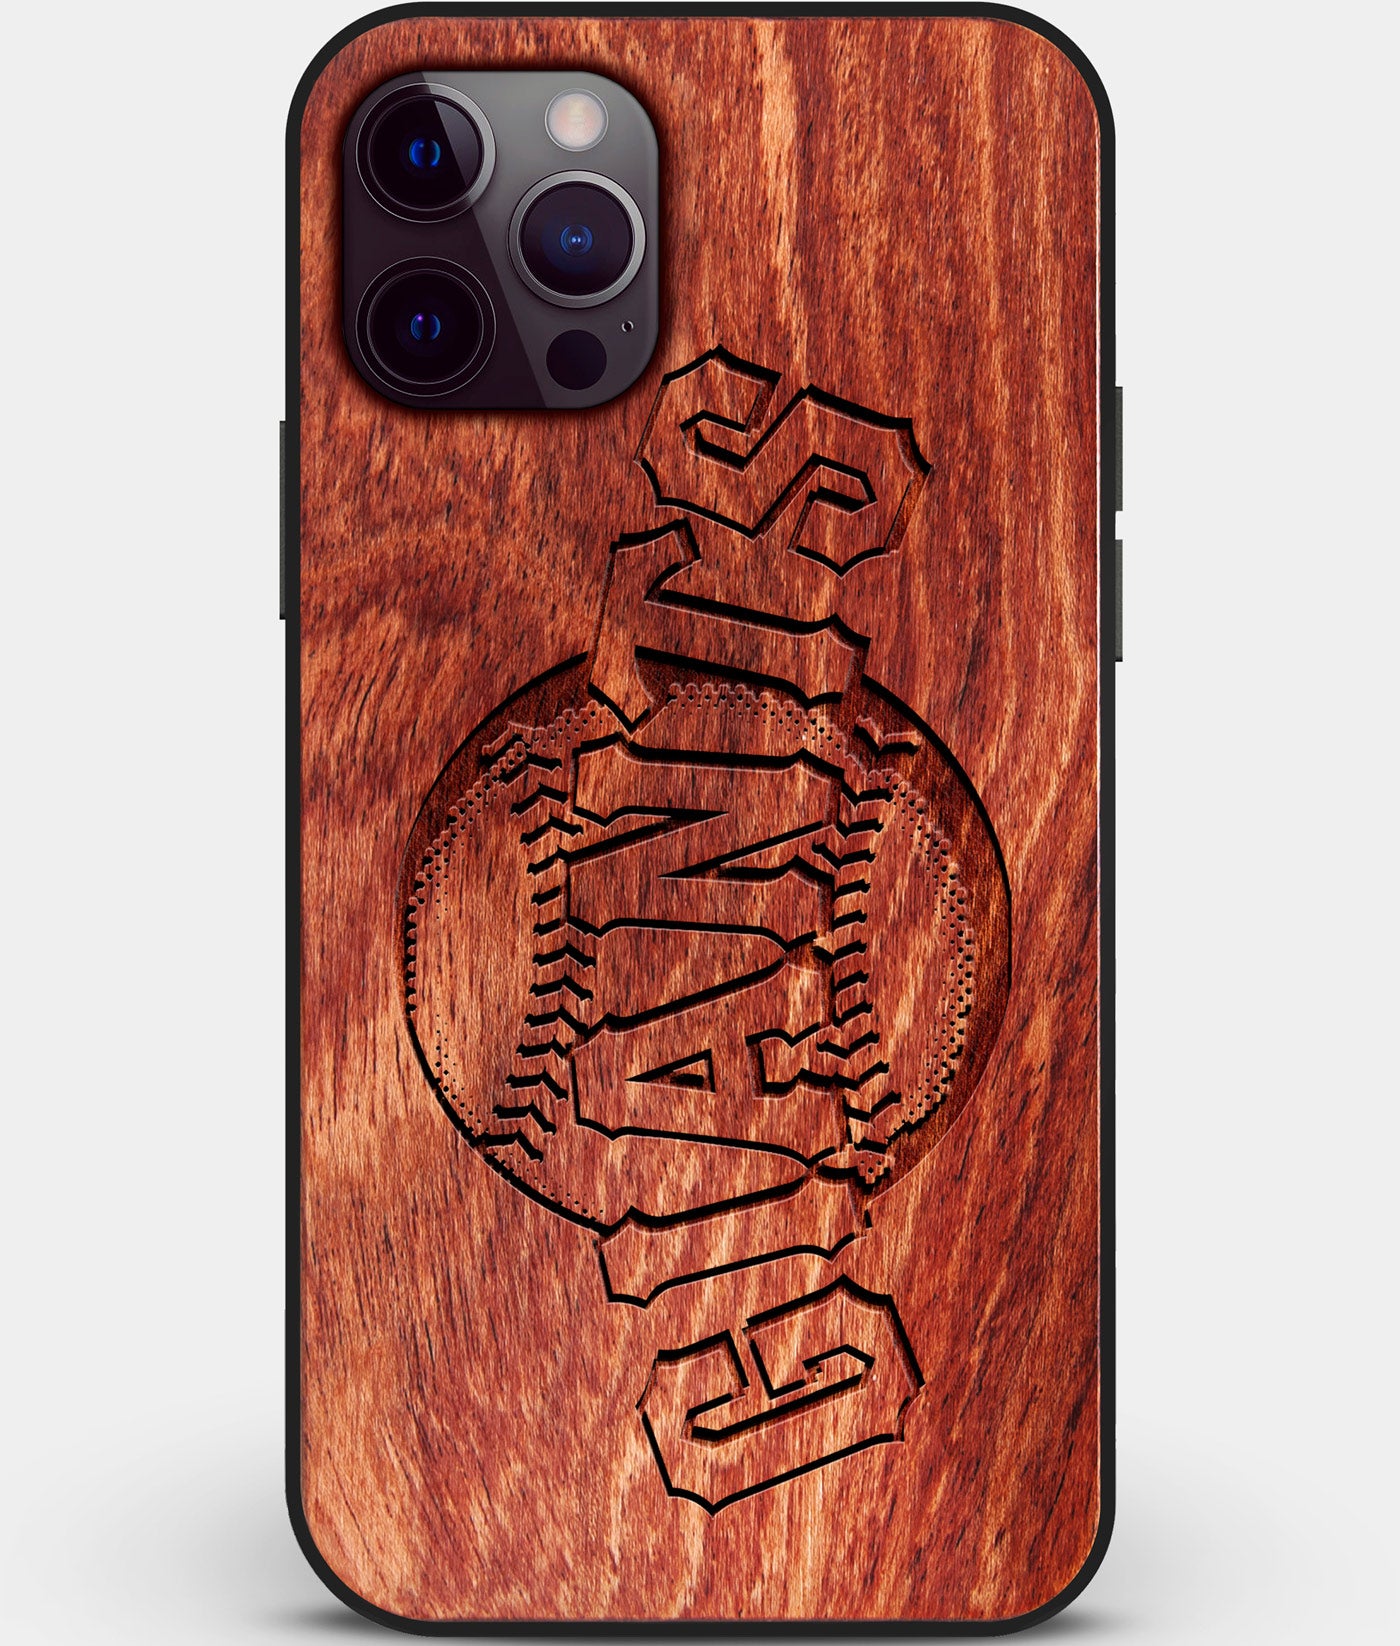 Custom Carved Wood San Francisco Giants iPhone 12 Pro Case | Personalized Mahogany Wood San Francisco Giants Cover, Birthday Gift, Gifts For Him, Monogrammed Gift For Fan | by Engraved In Nature